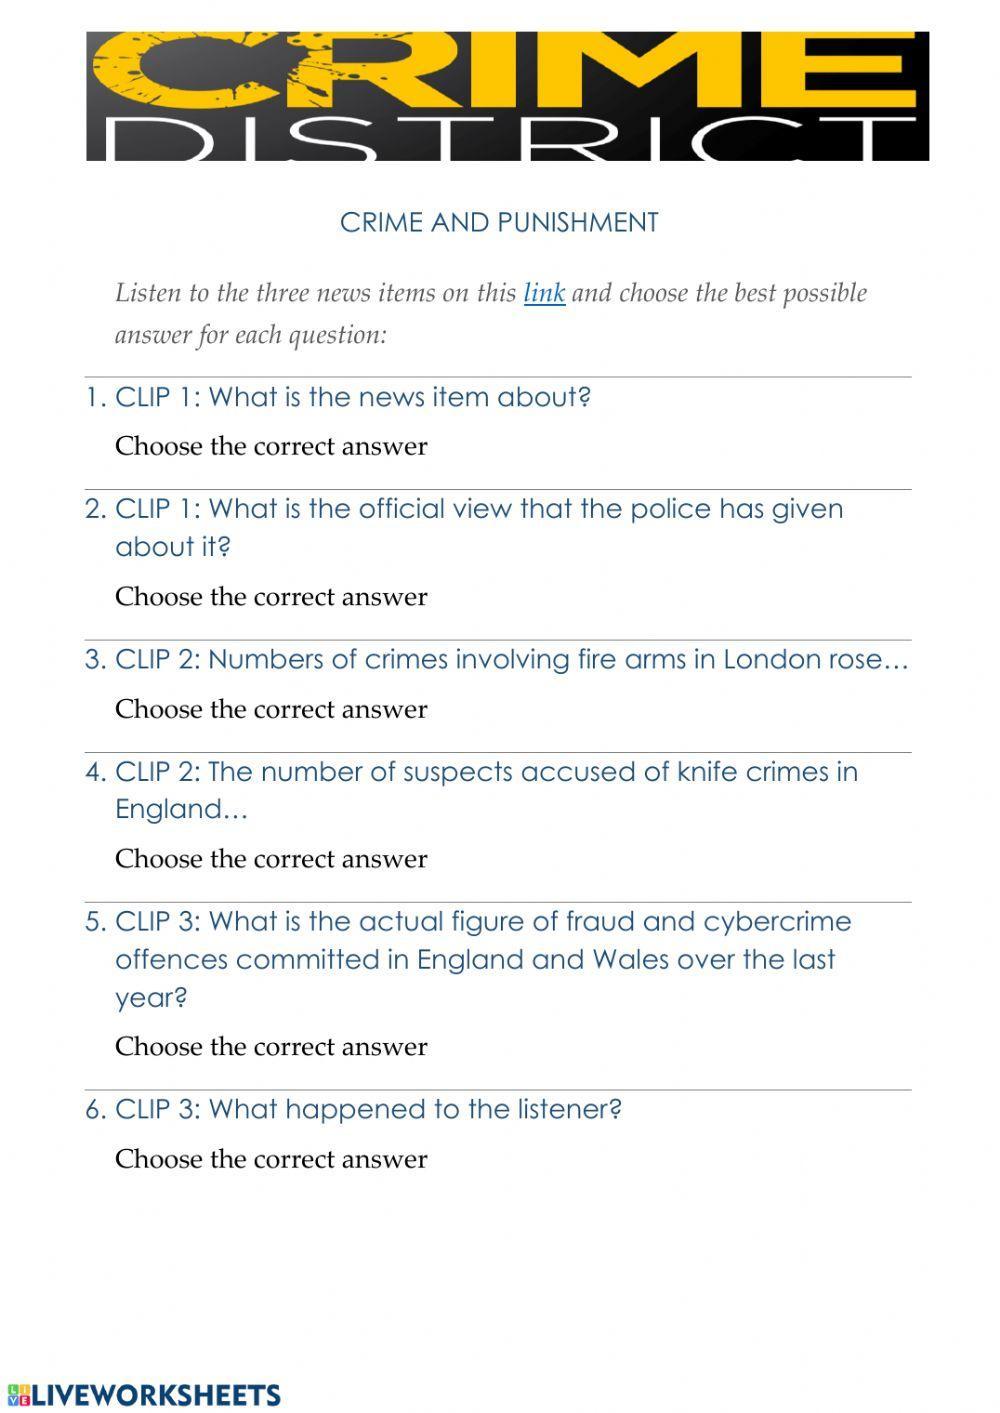 LISTENING COMPREHENSION: CRIME MULTIPLE CHOICE